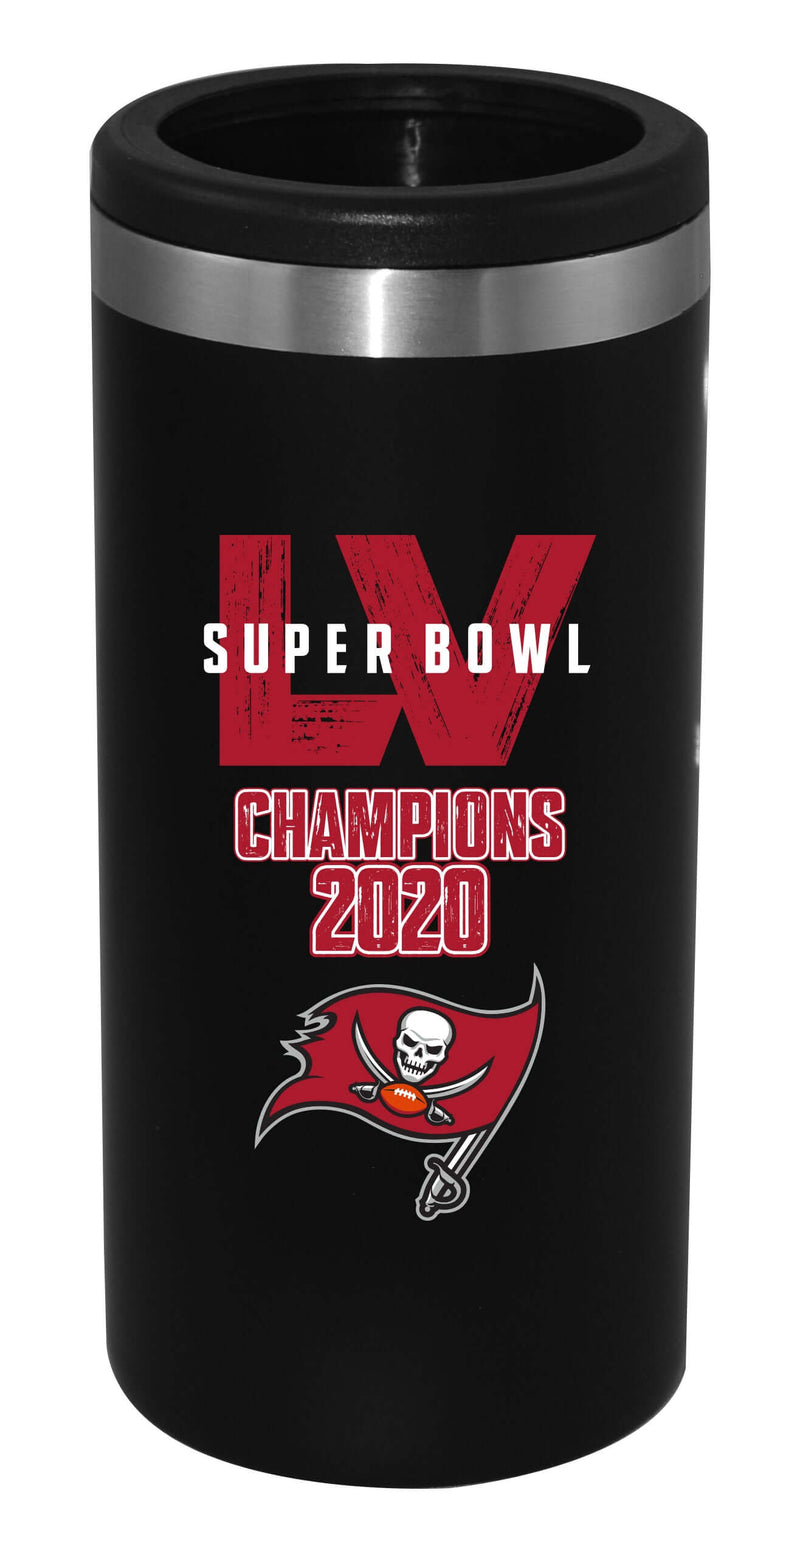 12oz Super Bowl 55 Champs Black Slim Can Holder | Tampa Bay Buccaneers NFL, OldProduct, Super Bowl, Tampa Bay Buccaneers, TBB 840198295624 $30.99